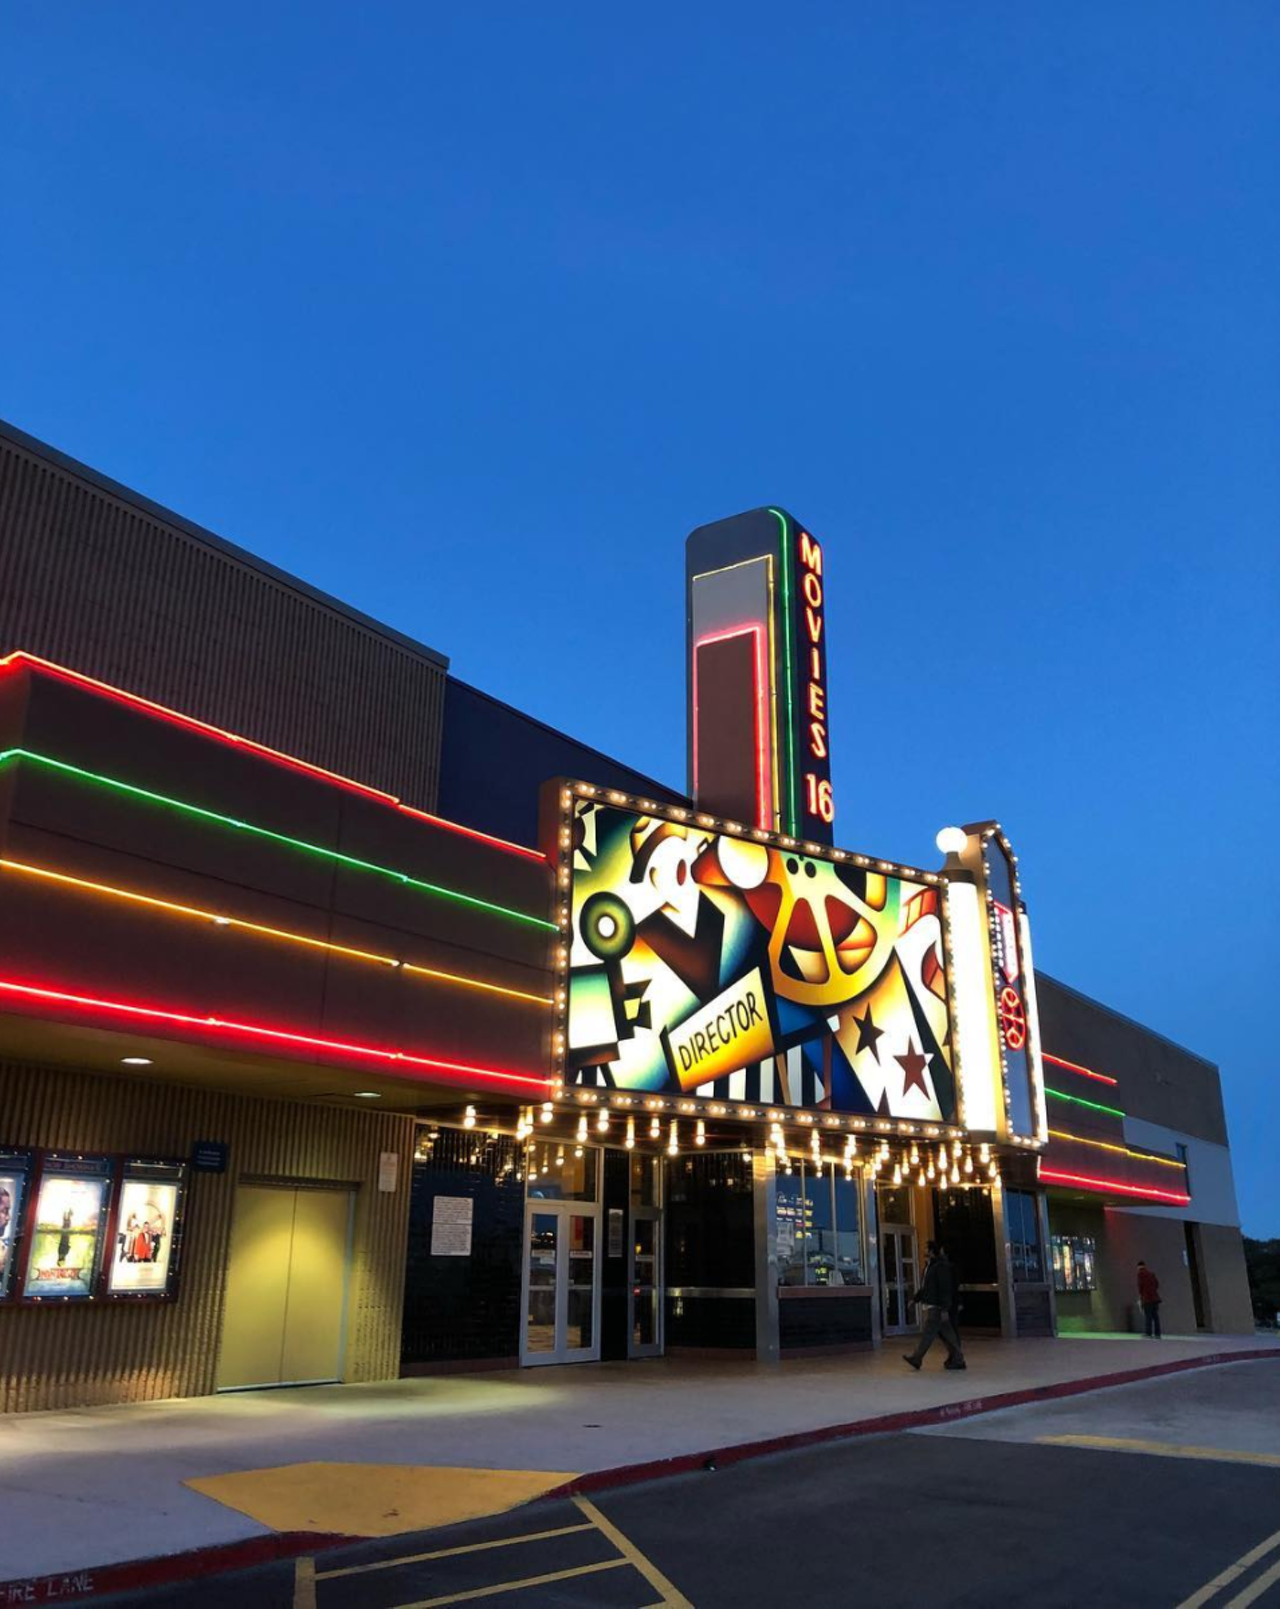 Catch a movie
5063 N.W. Loop 410, (210) 522-9660, fandango.com
Aside from special event movies, most movies at Cinemark 16 are less than $5 to see. Yes, even Justice Leauge in 3D.
Photo via Instagram / featuringmathew